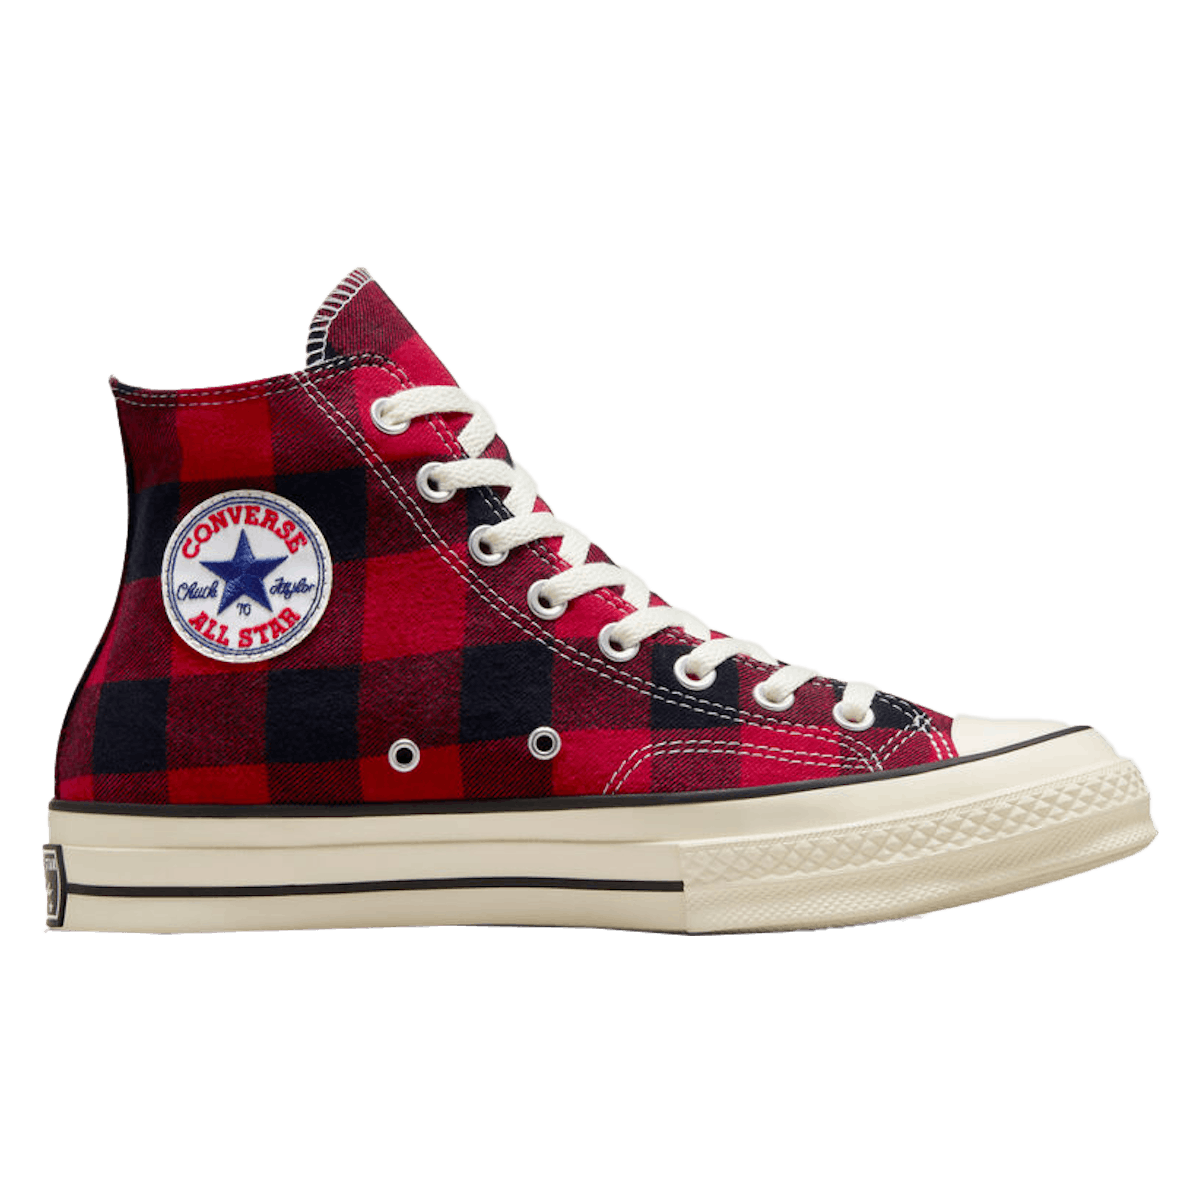 Converse Chuck 70 Upcycled "Red"